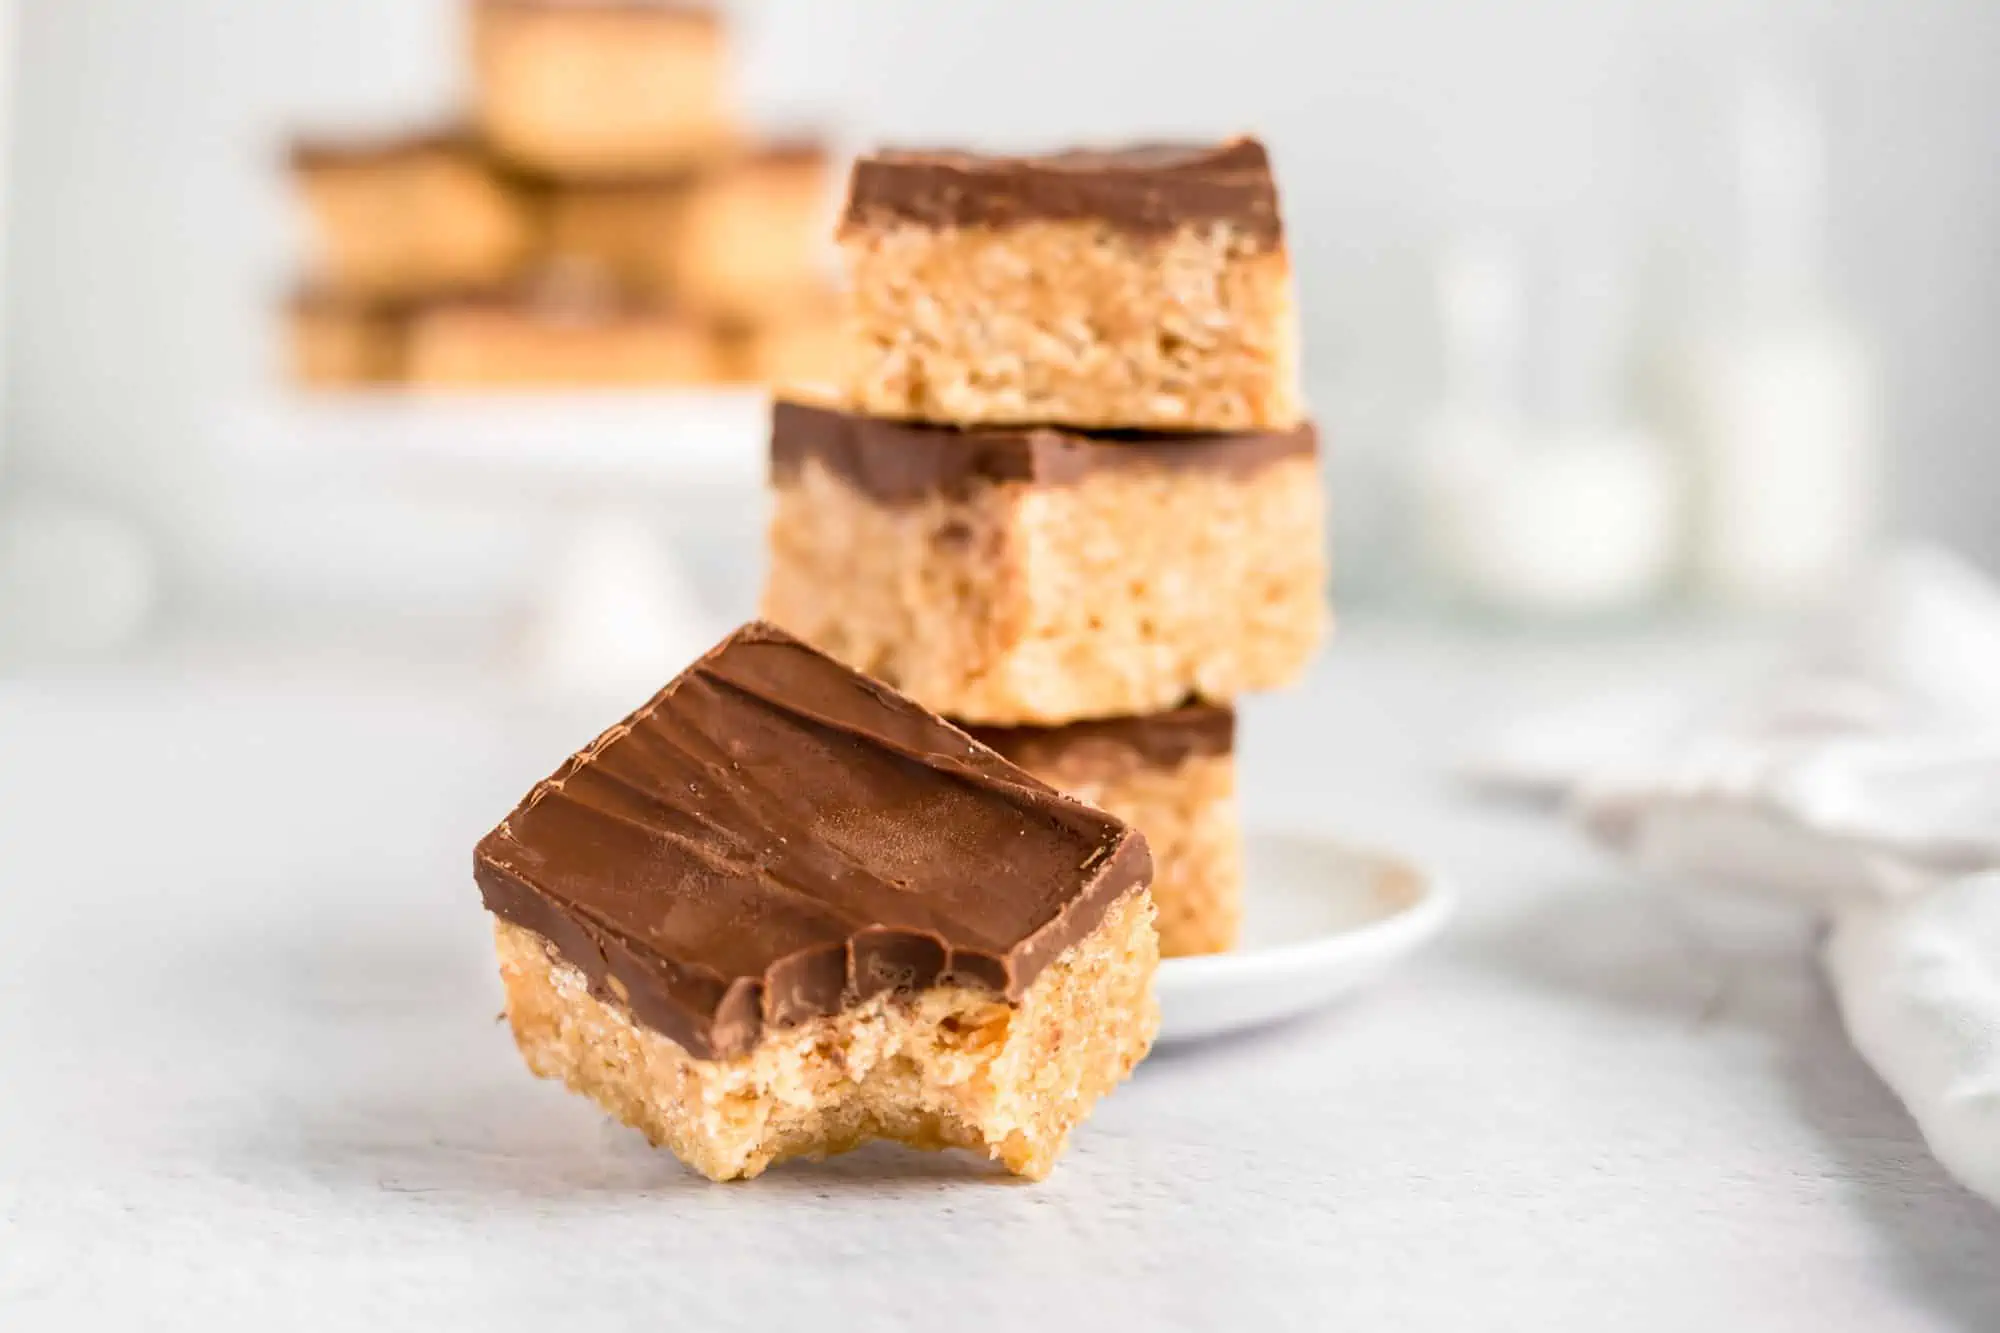 Gluten-free vegan dessert scotcharoo bars stacked on a plate with one missing a bite.